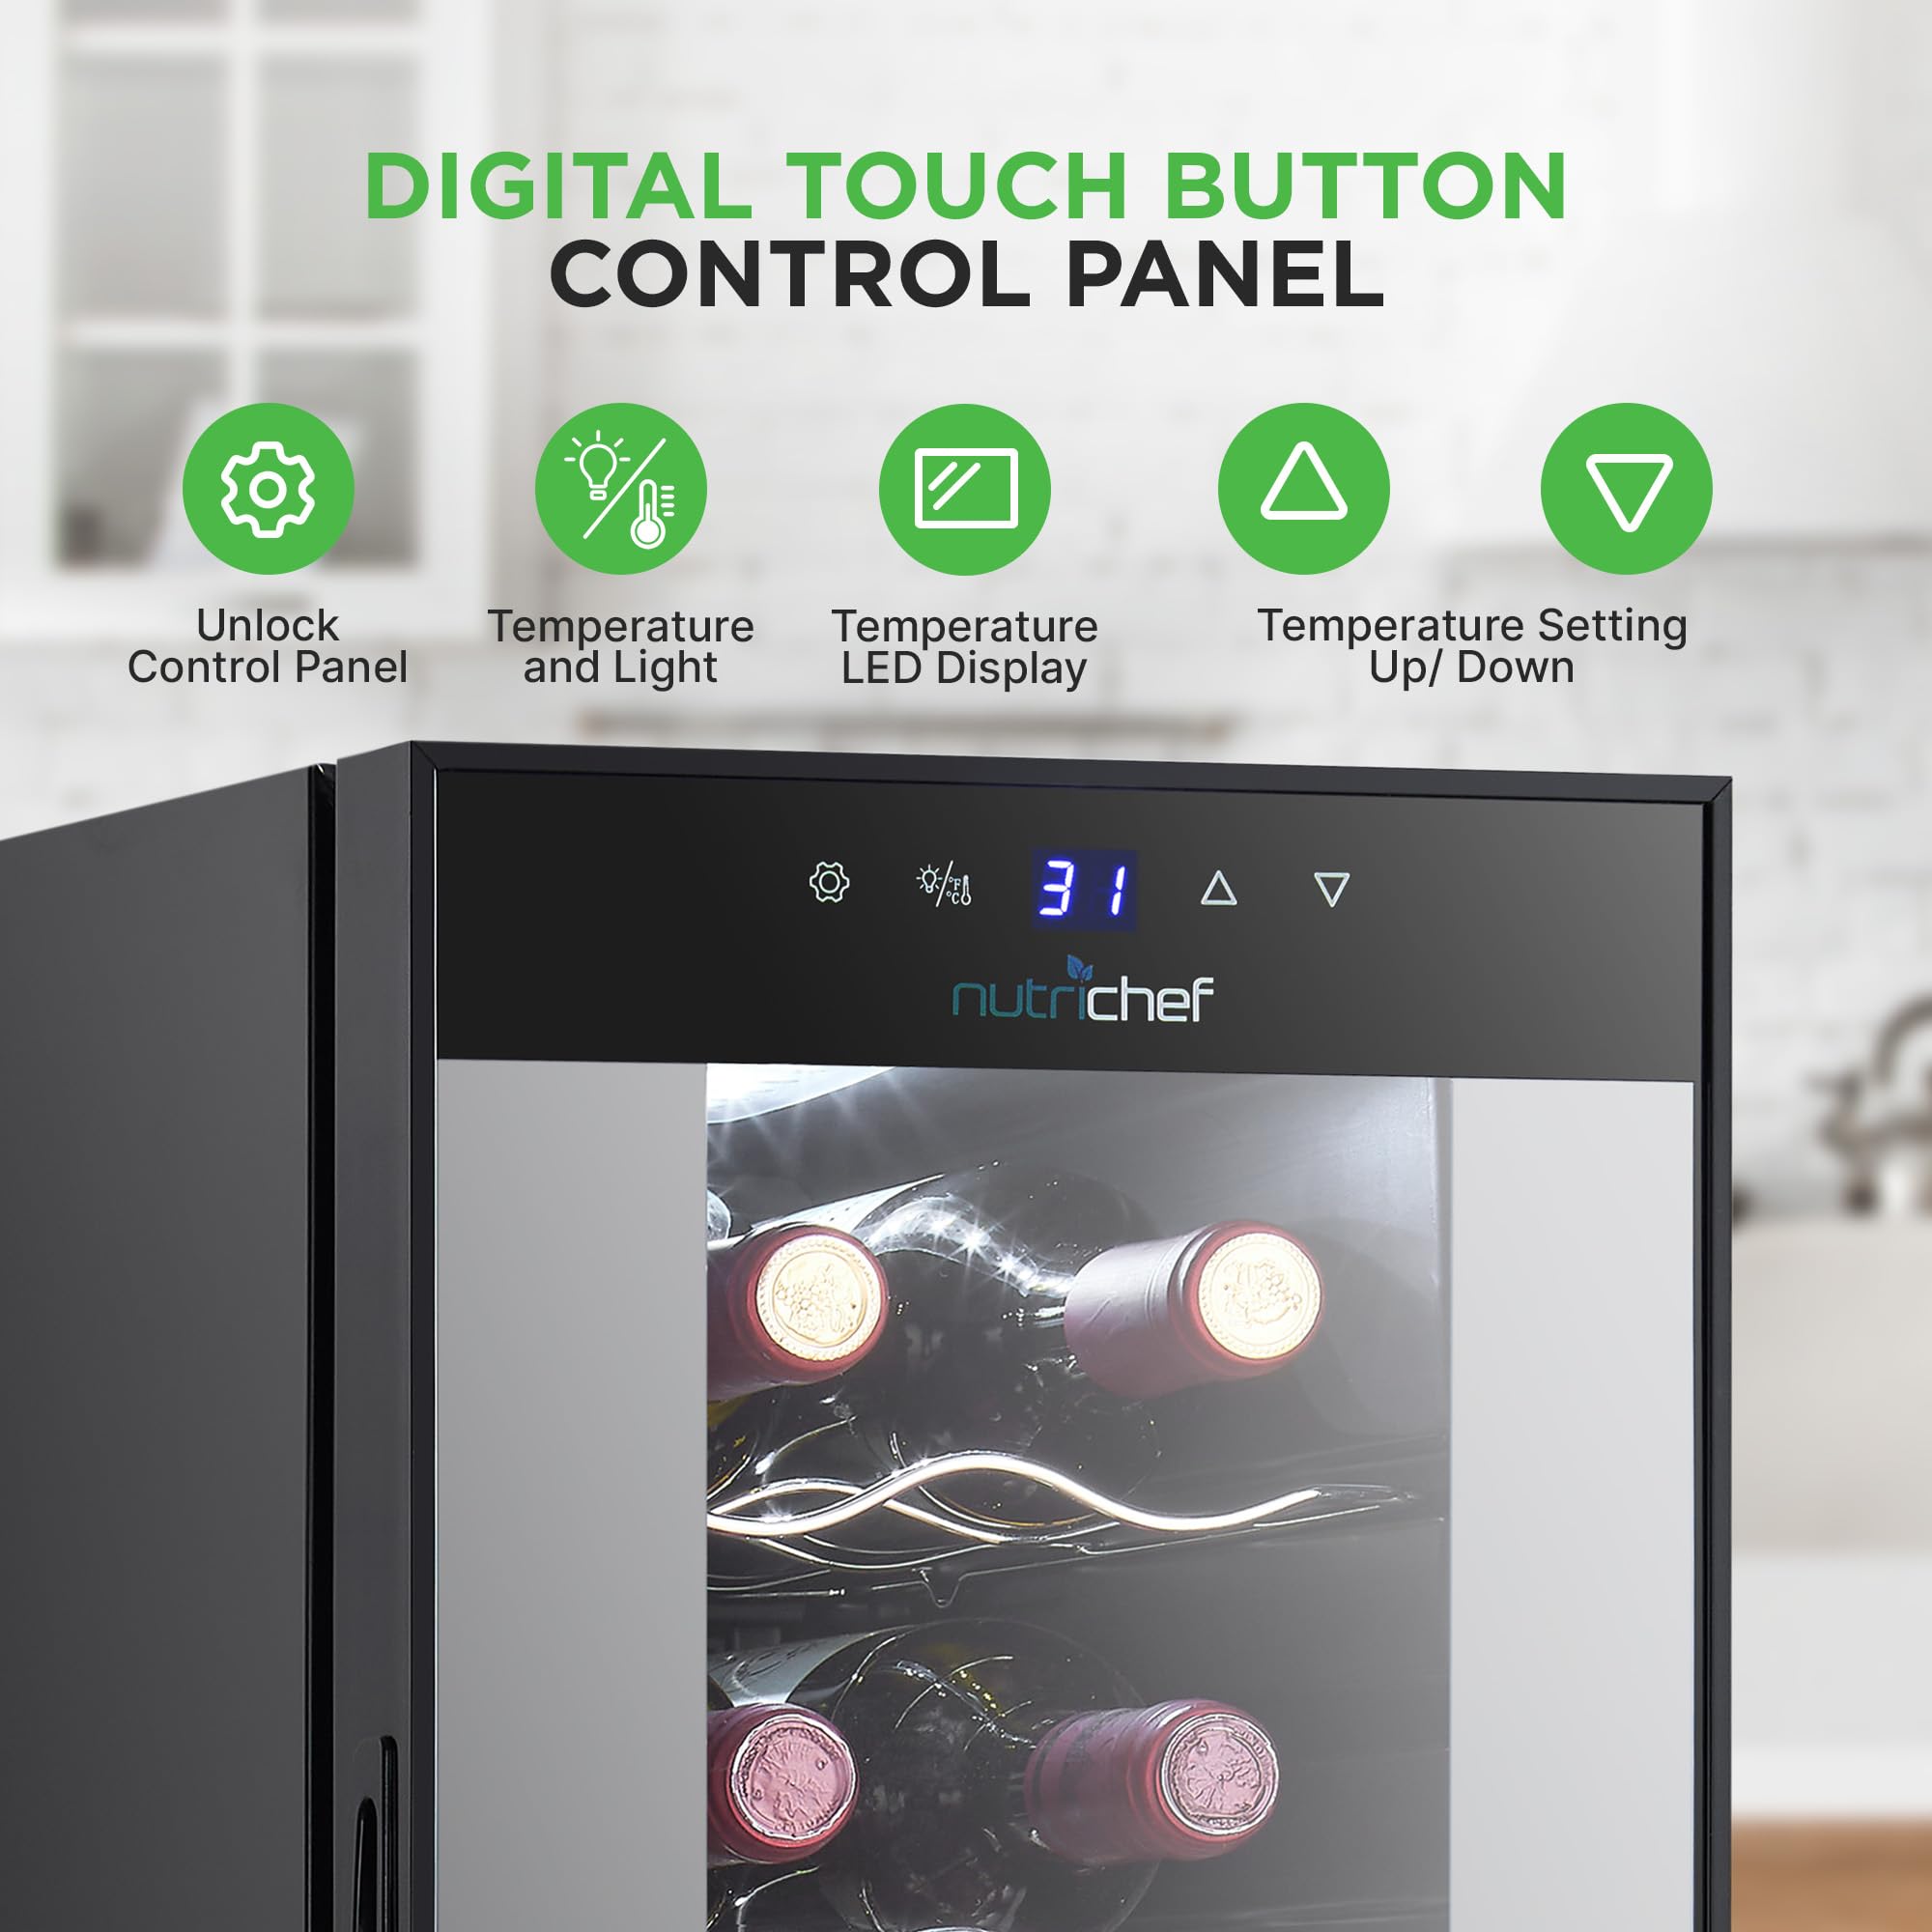 NutriChef PKCWC140 Chilling Refrigerator Cellar-Single-Zone Wine Cooler/Chiller, Digital Touch Button Control with Air Tight Seal, Contains Placement for Standing (14 Bottle Storage Capacity), Black